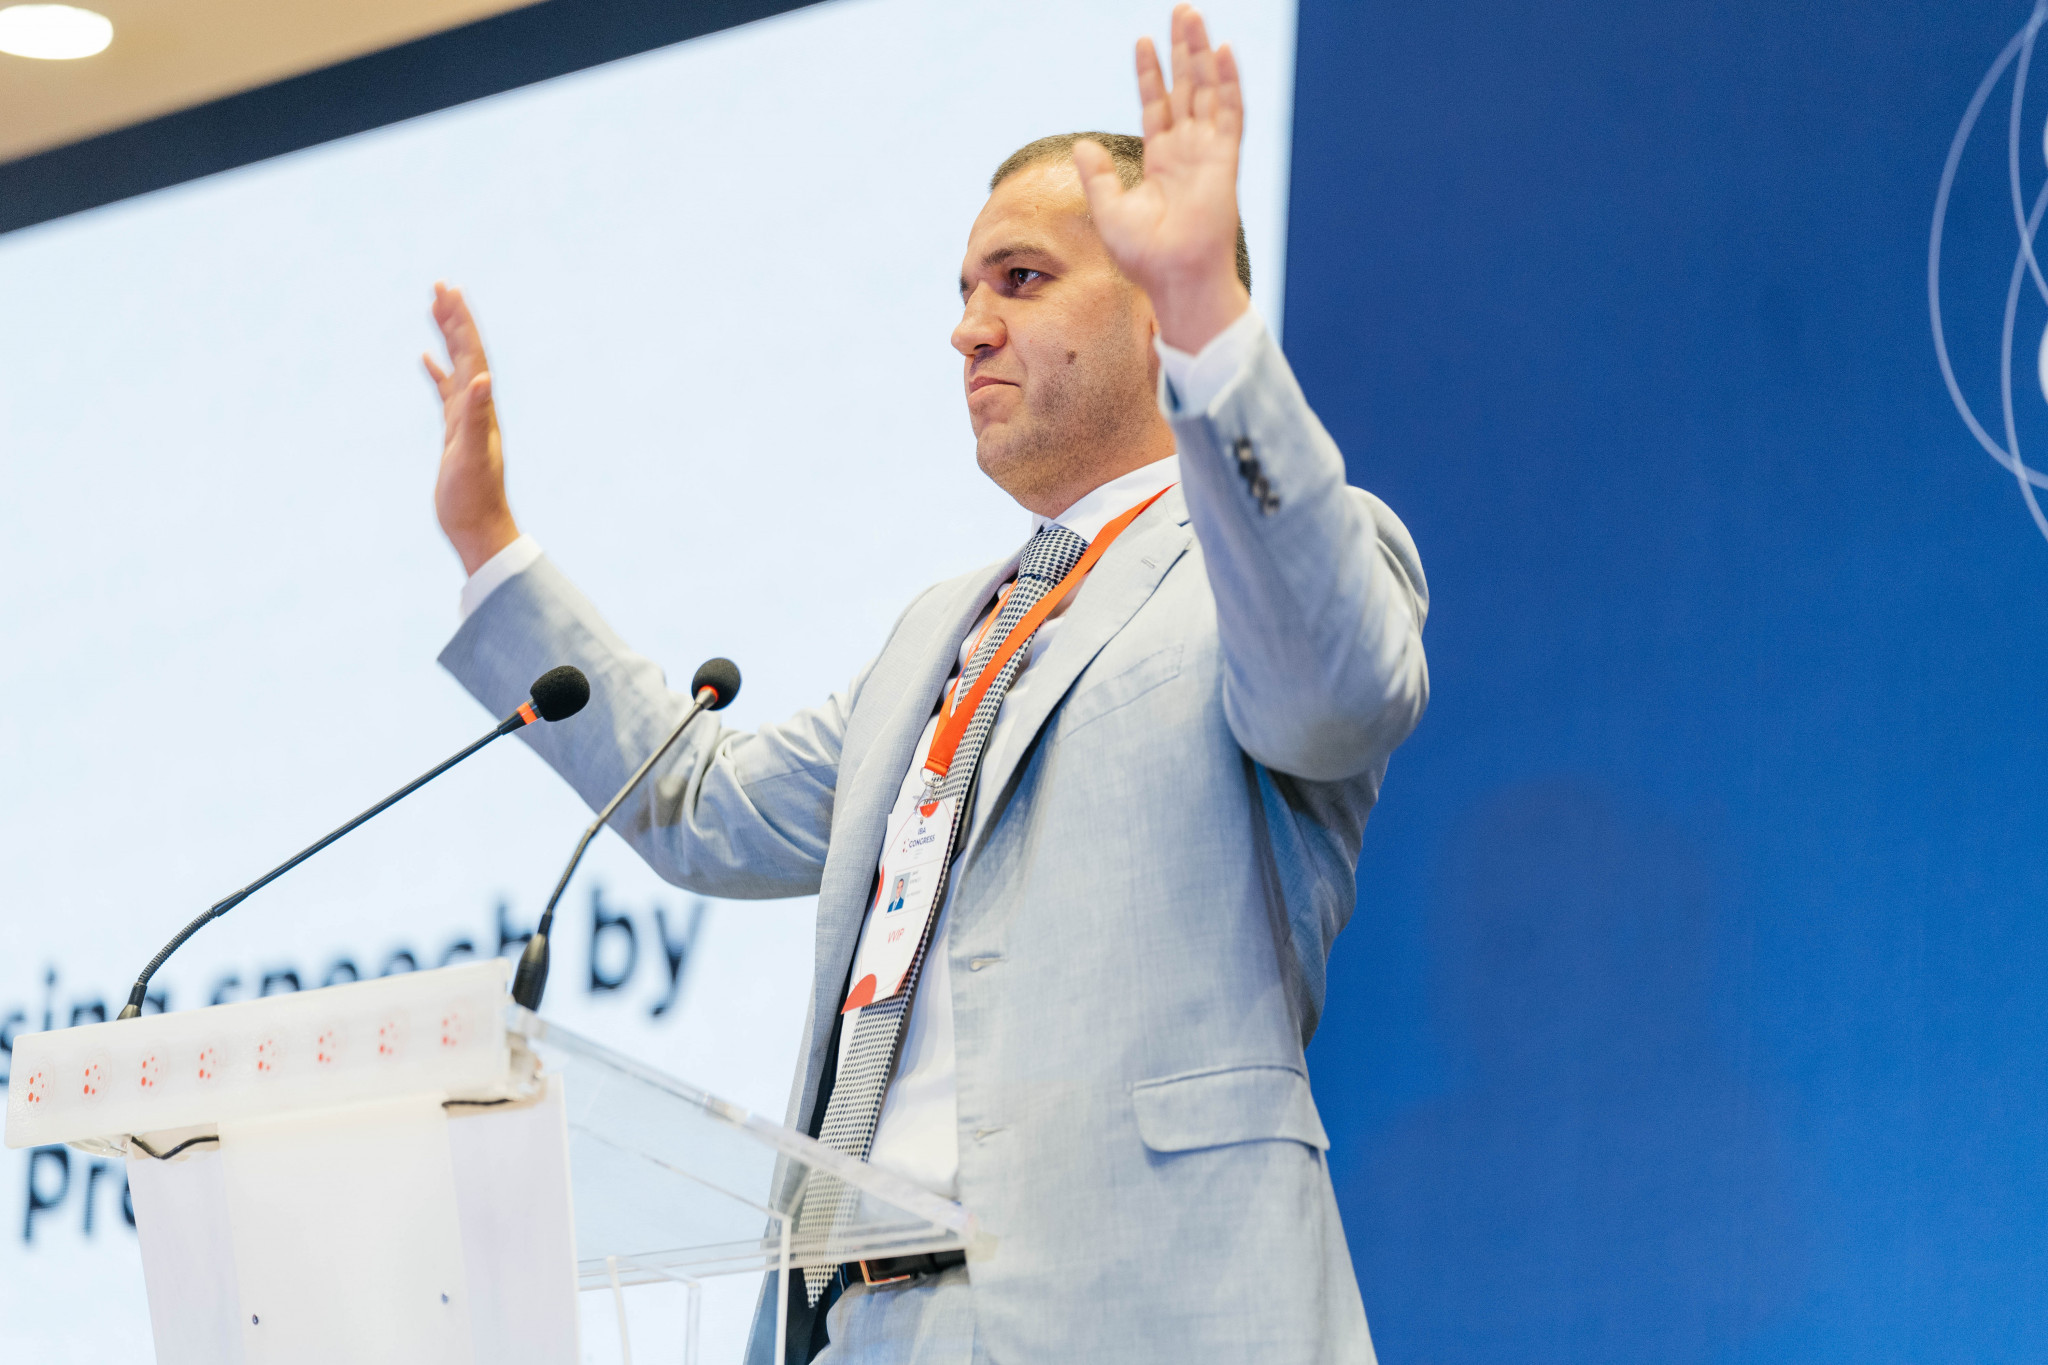 IBA President Umar Kremlev, one of two Russian heads of an Olympic sport, said that "the time has now come" for Russia and Belarus to compete under their flags in sport ©IBA